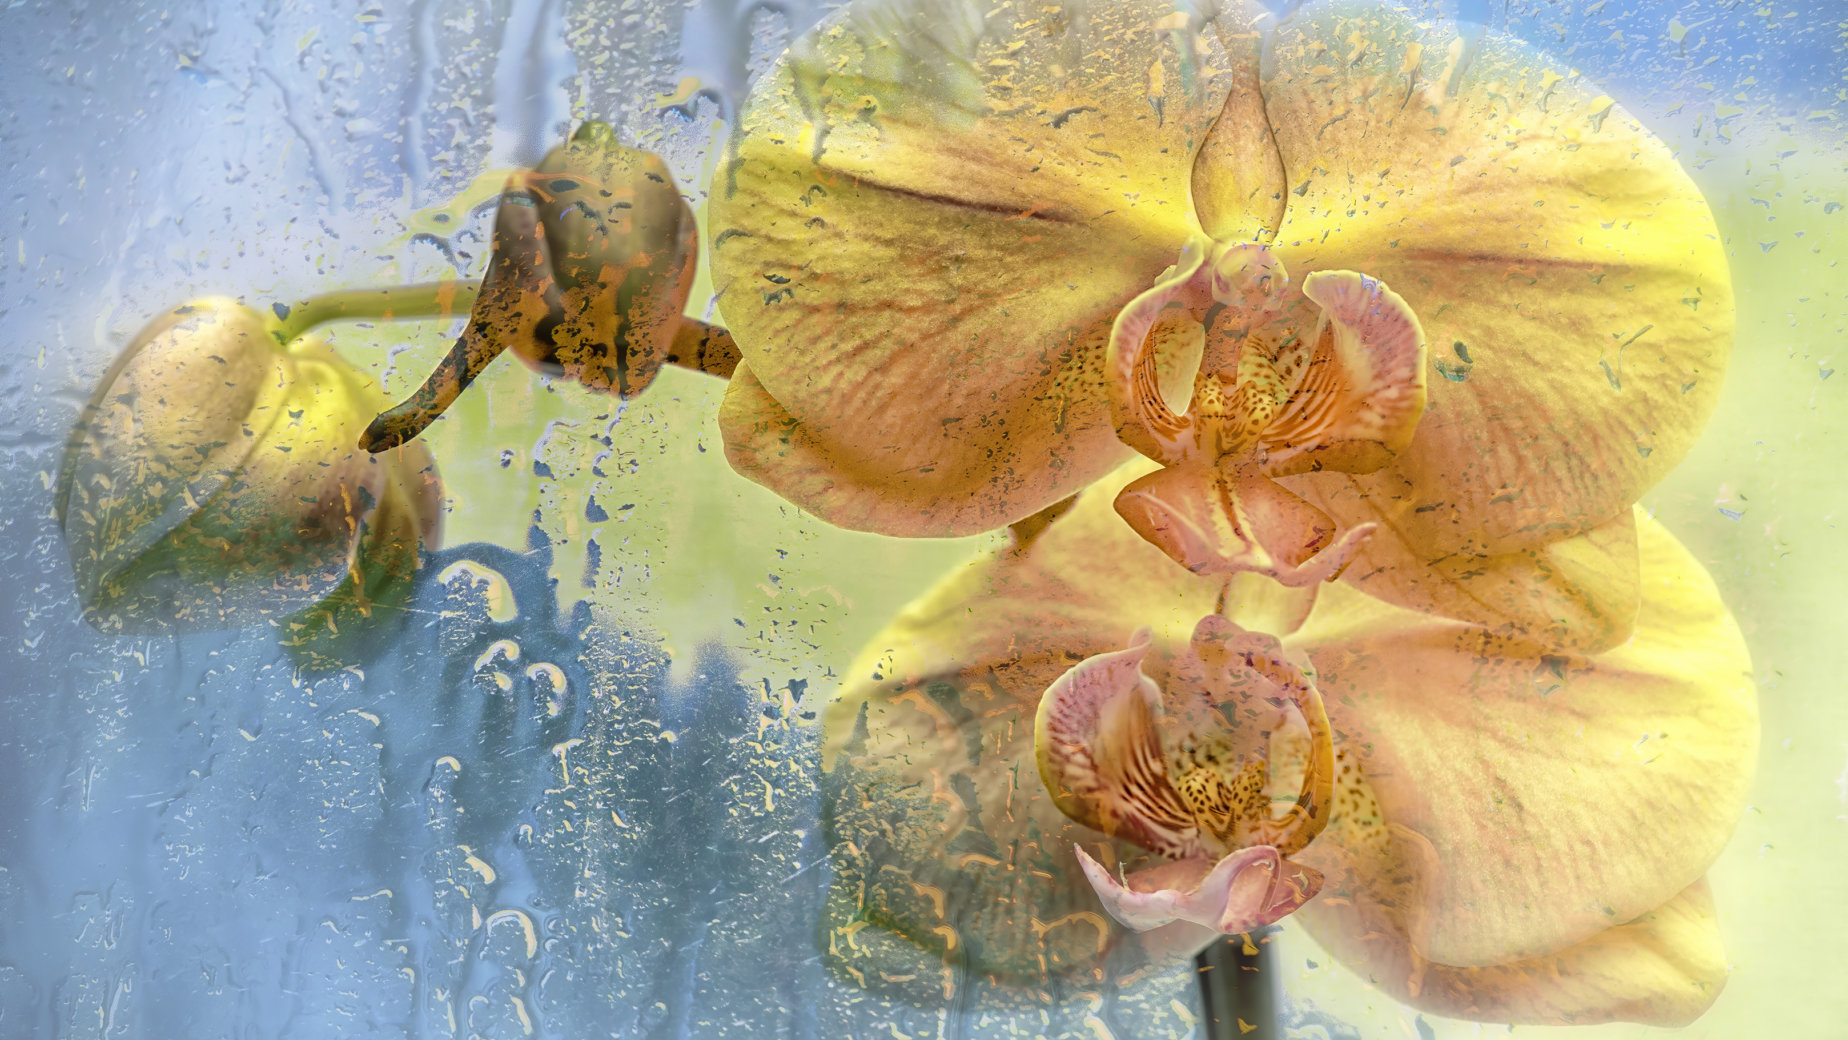 In the Rain Under Glass by Lori Davy